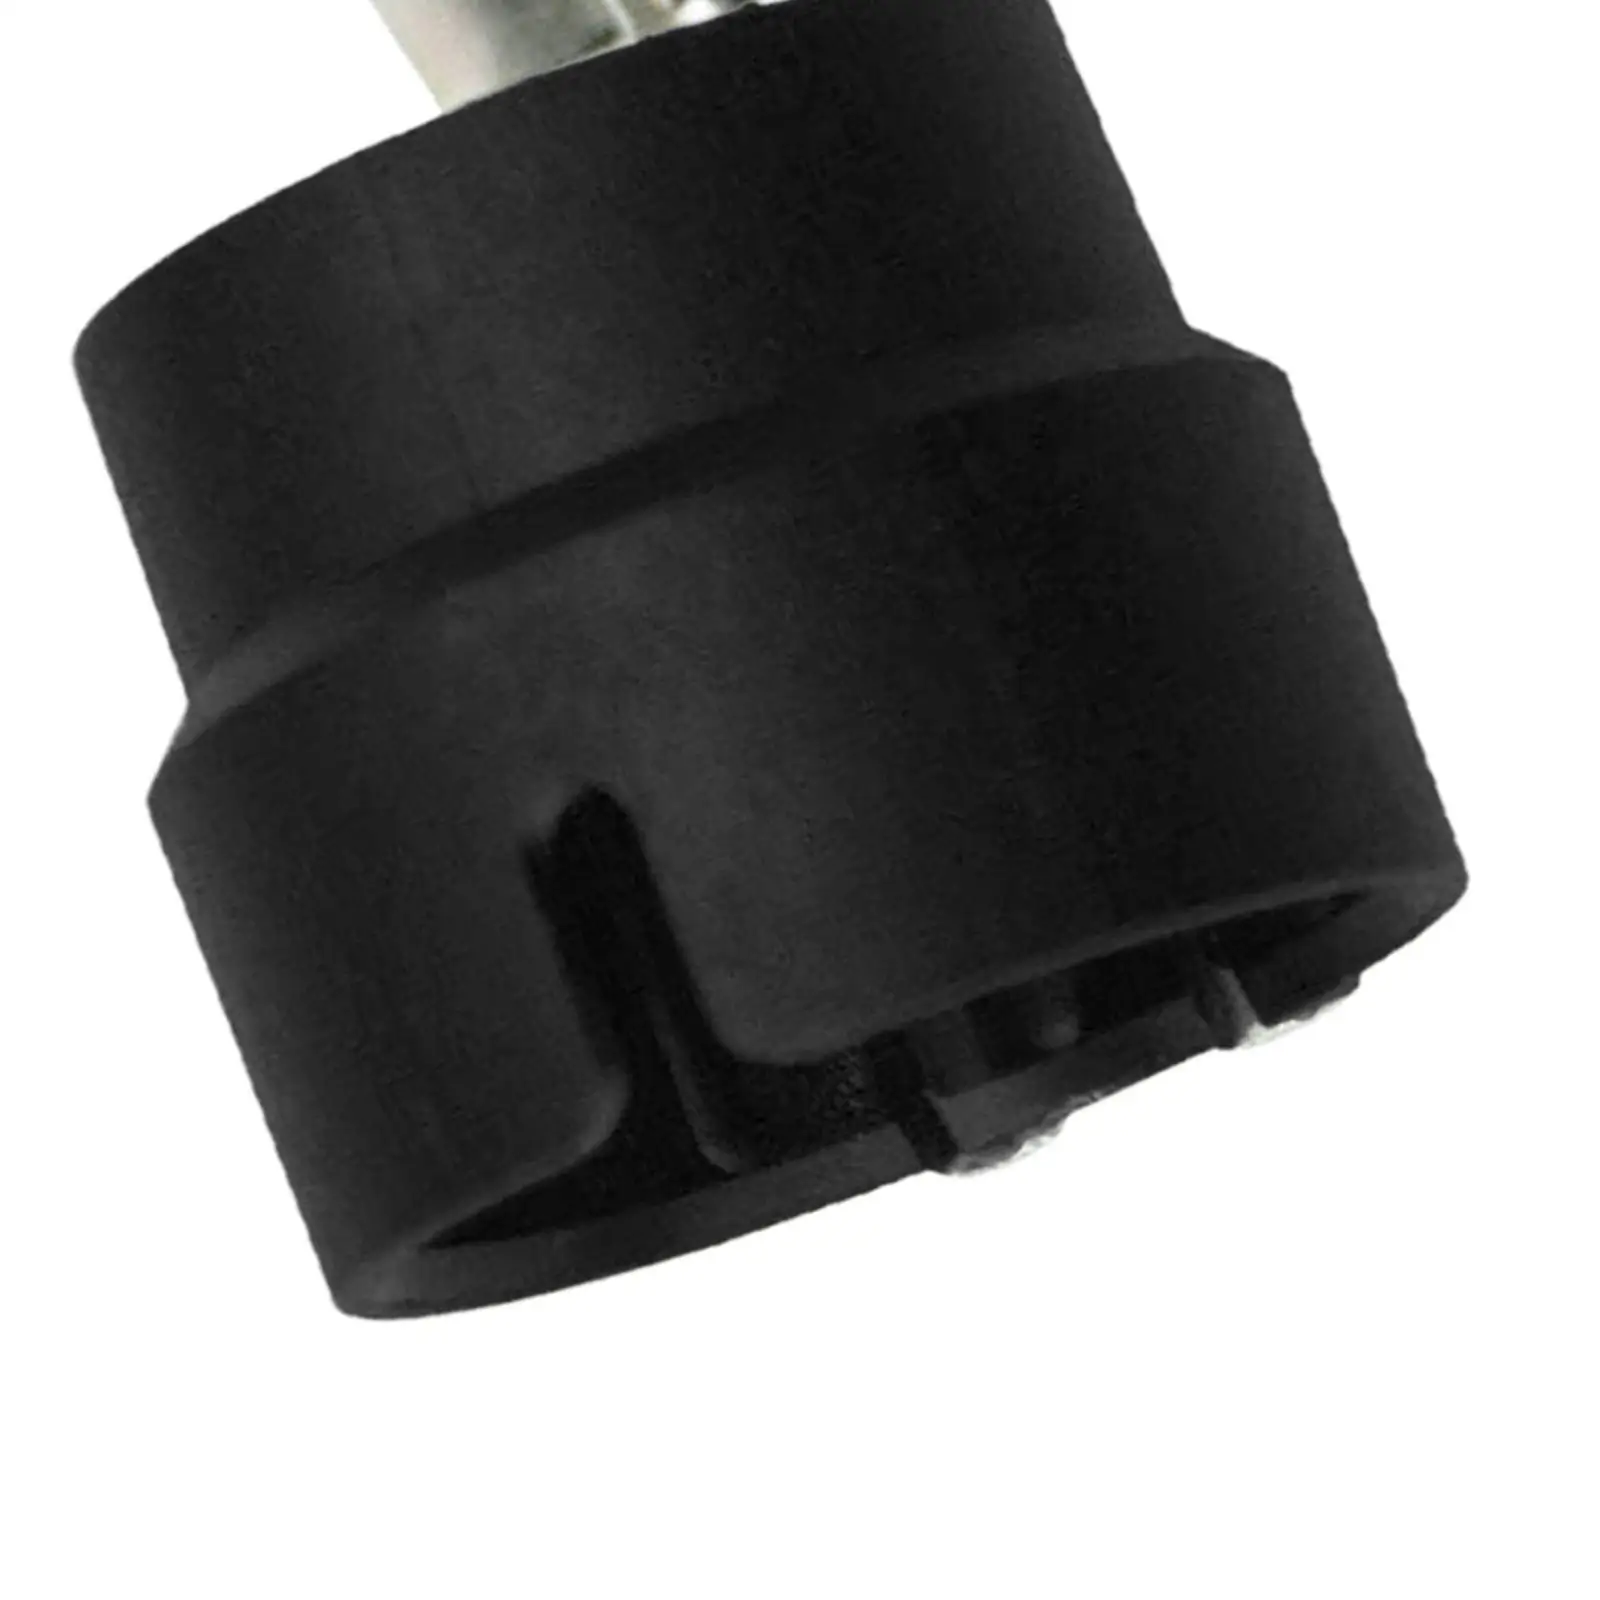 7Pin/13Pin Trailer Plug Holder Connector Trailer Connector for